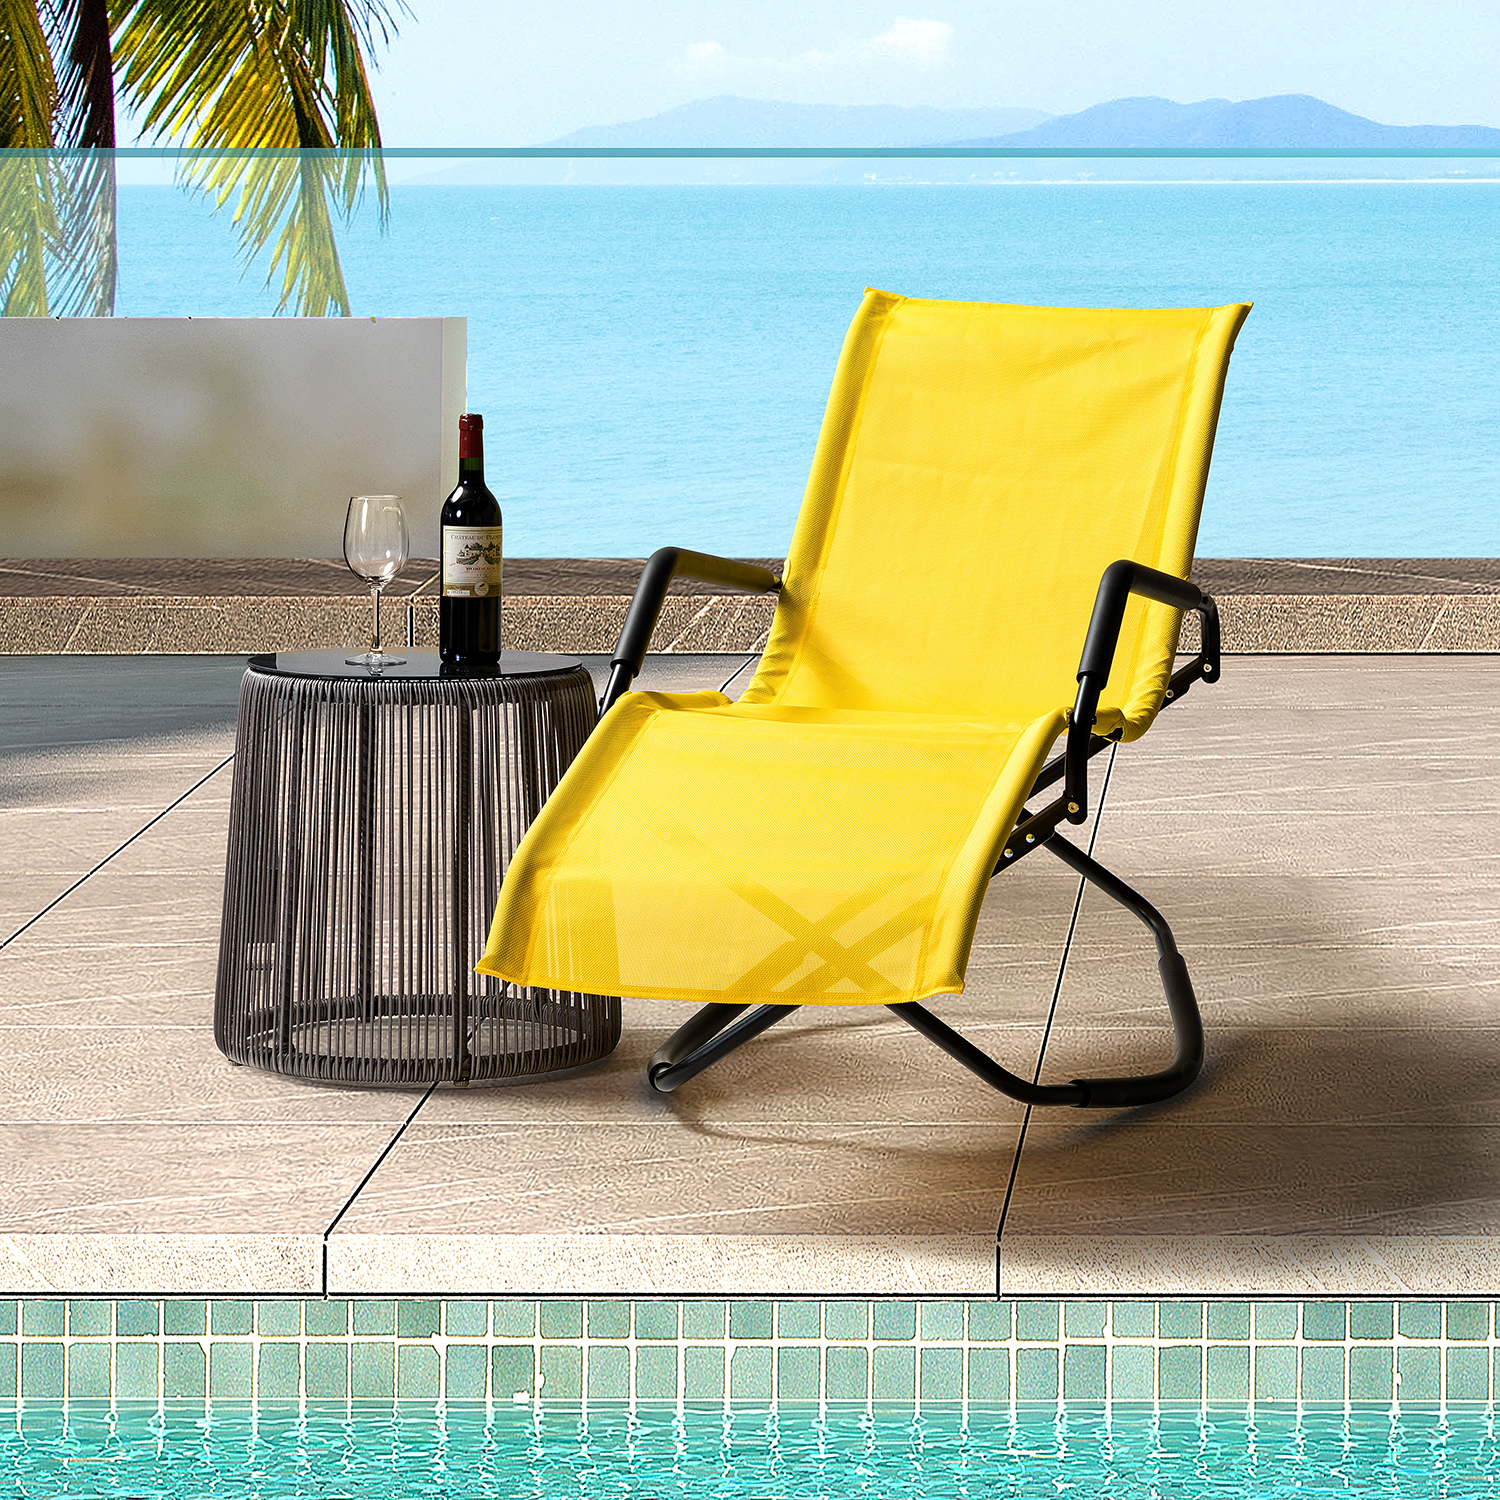 SESSLIFE Folding Reclining Chair, Metal Patio Rocking Recliner, Indoor Outdoor Heavy Duty Portable Chair, TE3144 - image 1 of 7